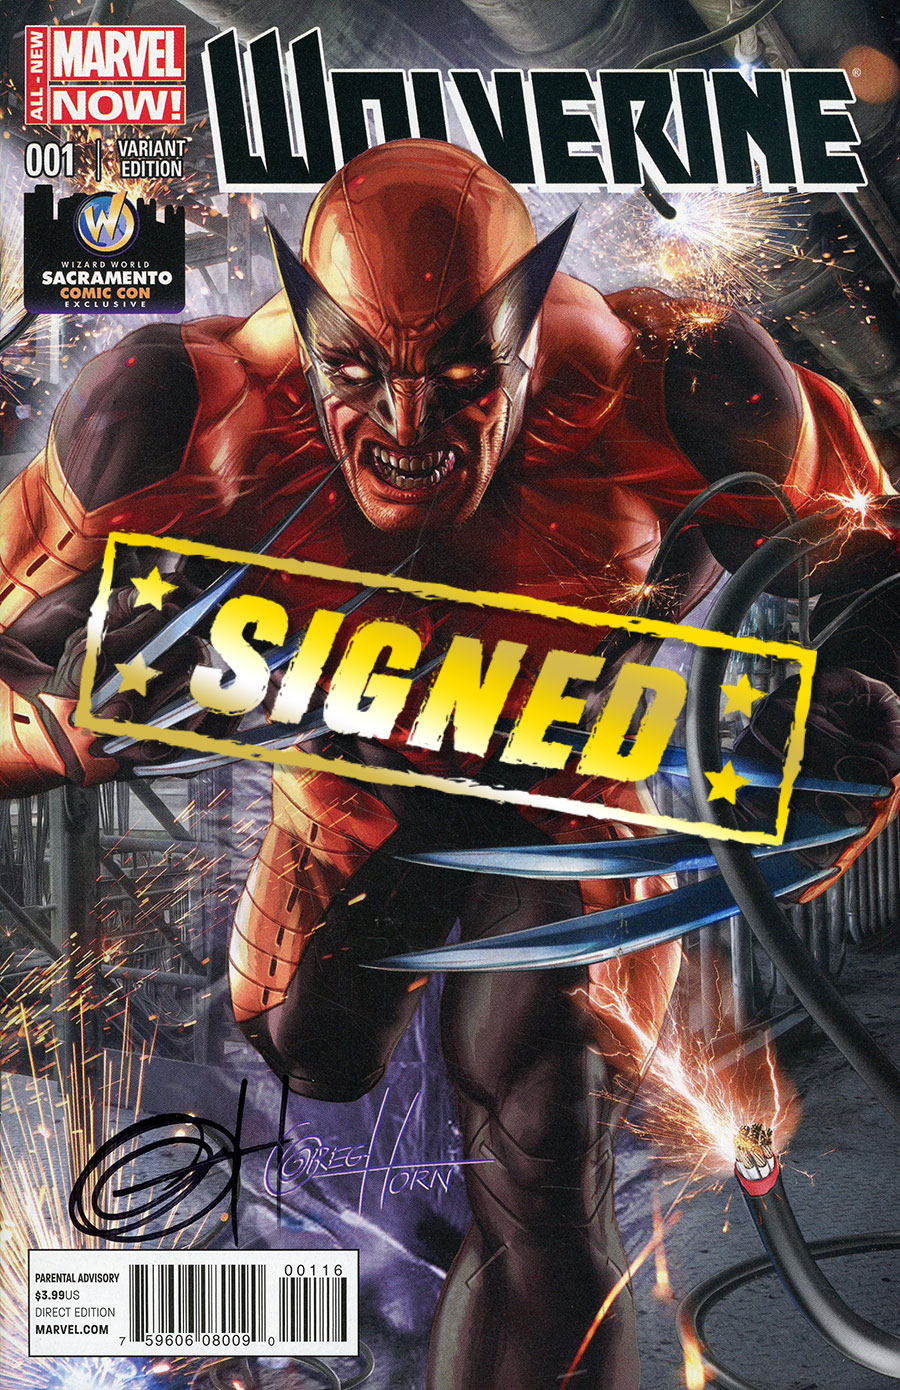 Wolverine Vol 6 #1 Cover G Wizard World Sacramento Comic Con Exclusive Greg Horn Color Variant Cover Signed By Greg Horn (No Certificate)